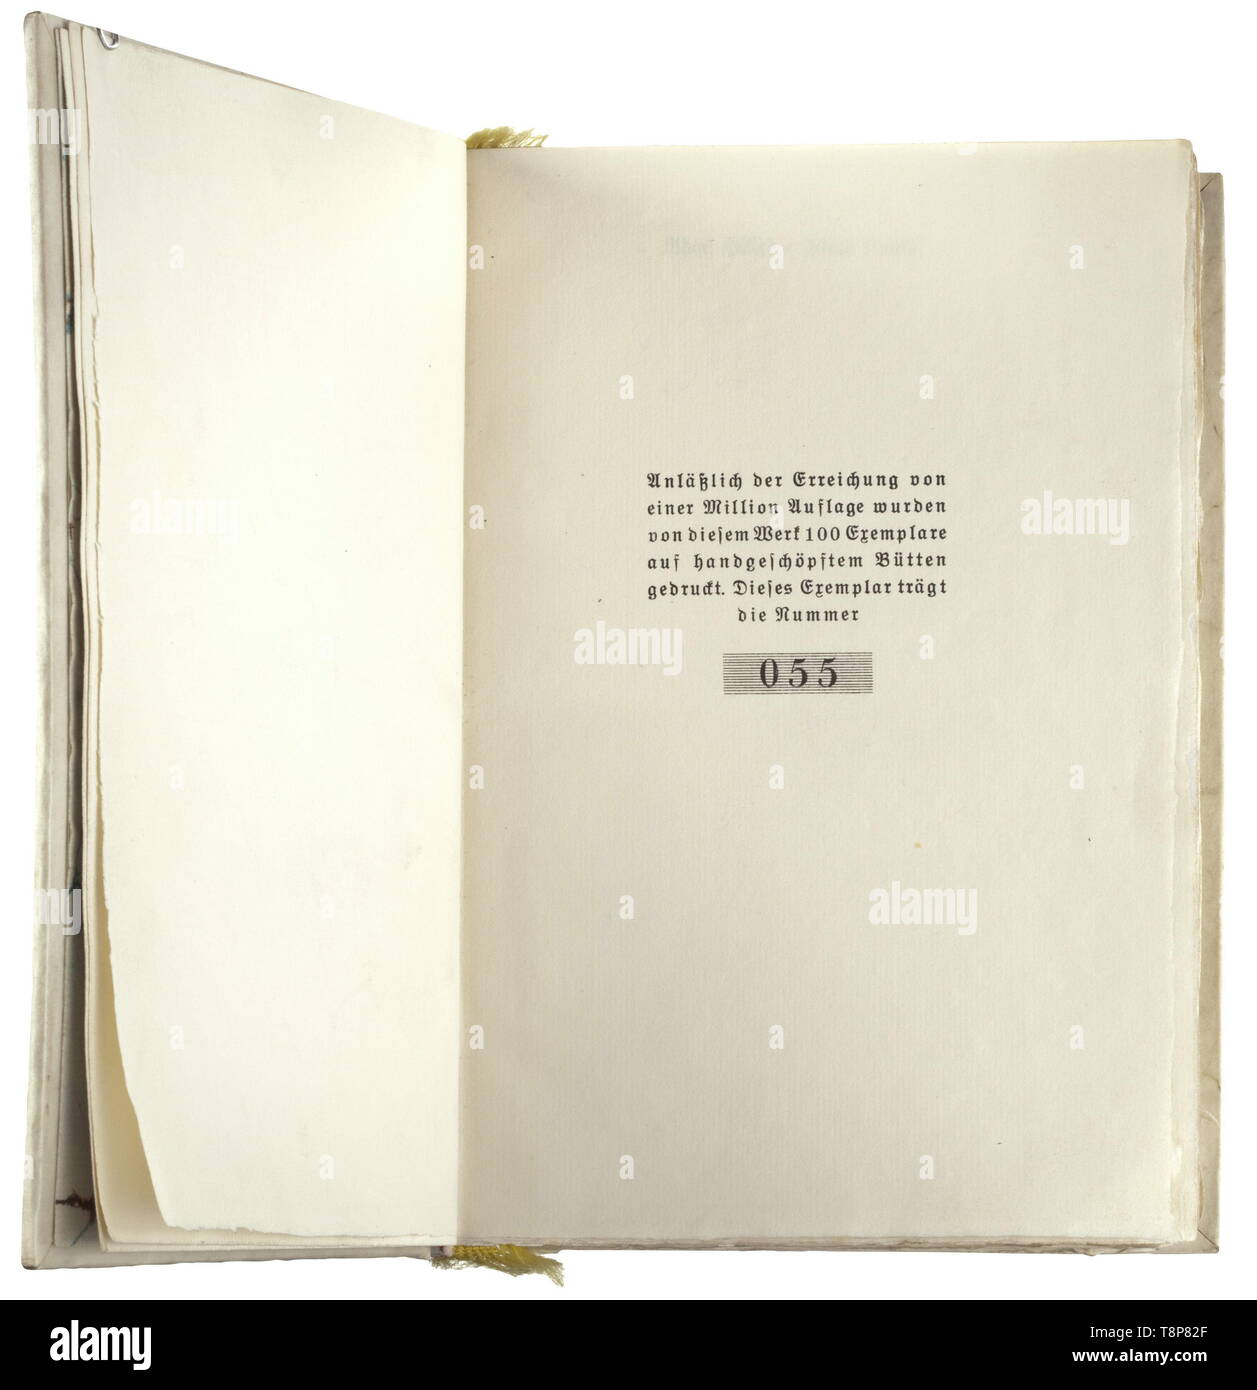 Adolf Hitler - Mein Kampf A limited deluxe edition 1933. Complete edition  with 782 pages of handmade paper. White, gold-embossed parchment-binding,  gilt upper edges. Flyleaf with inscription (tr.) "On the occasion of